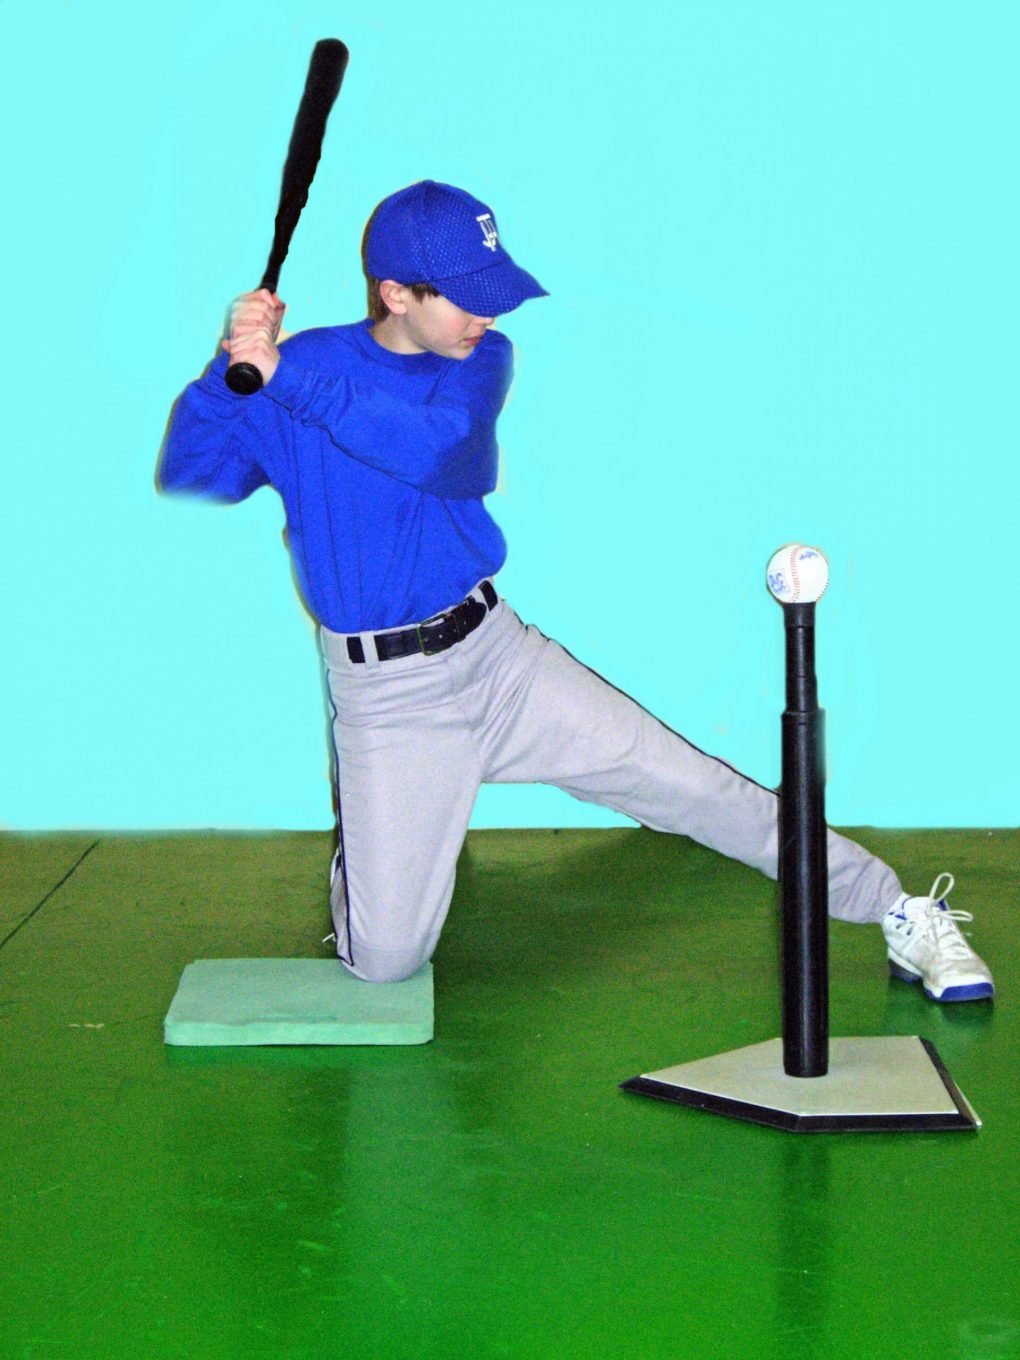 Baseball Hitting Drills that are Proven & Perfect